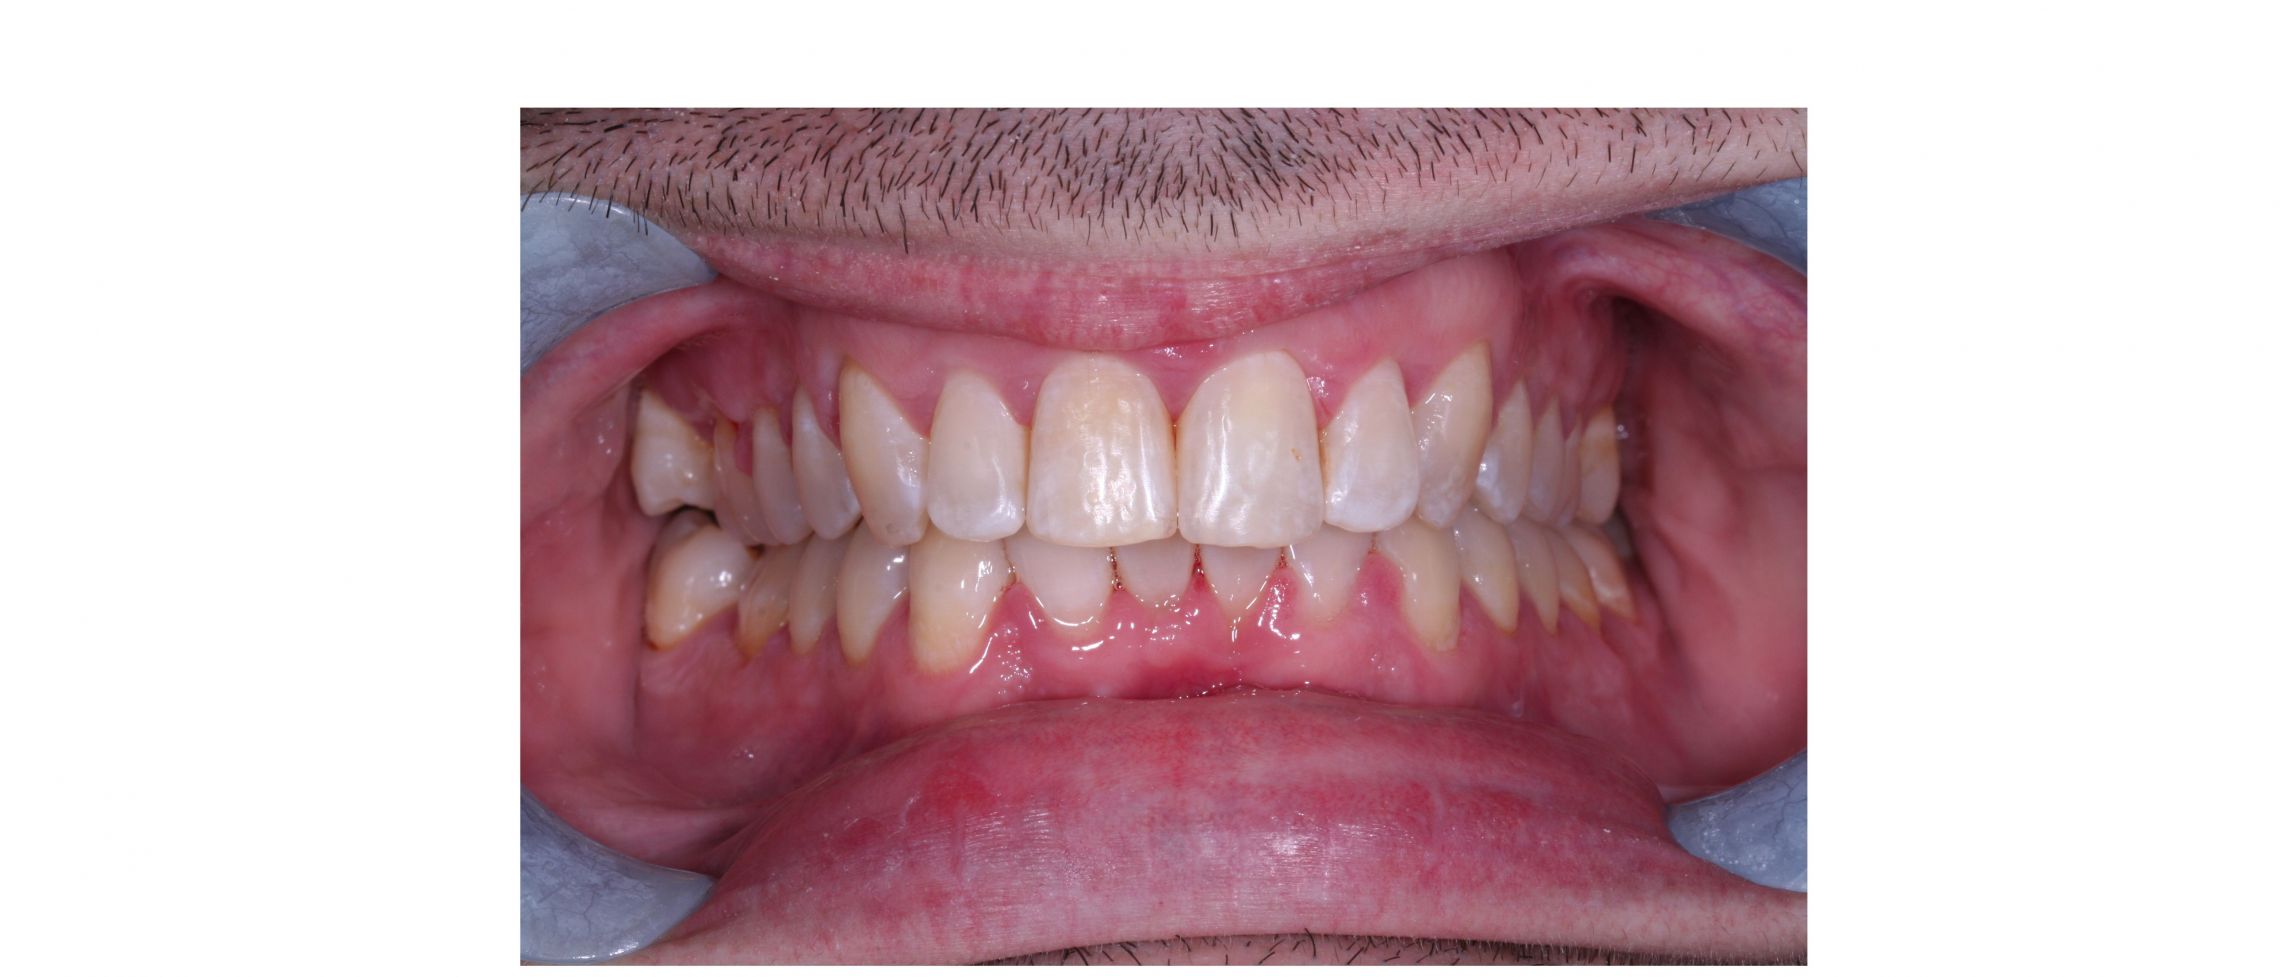 case6 - after treatment